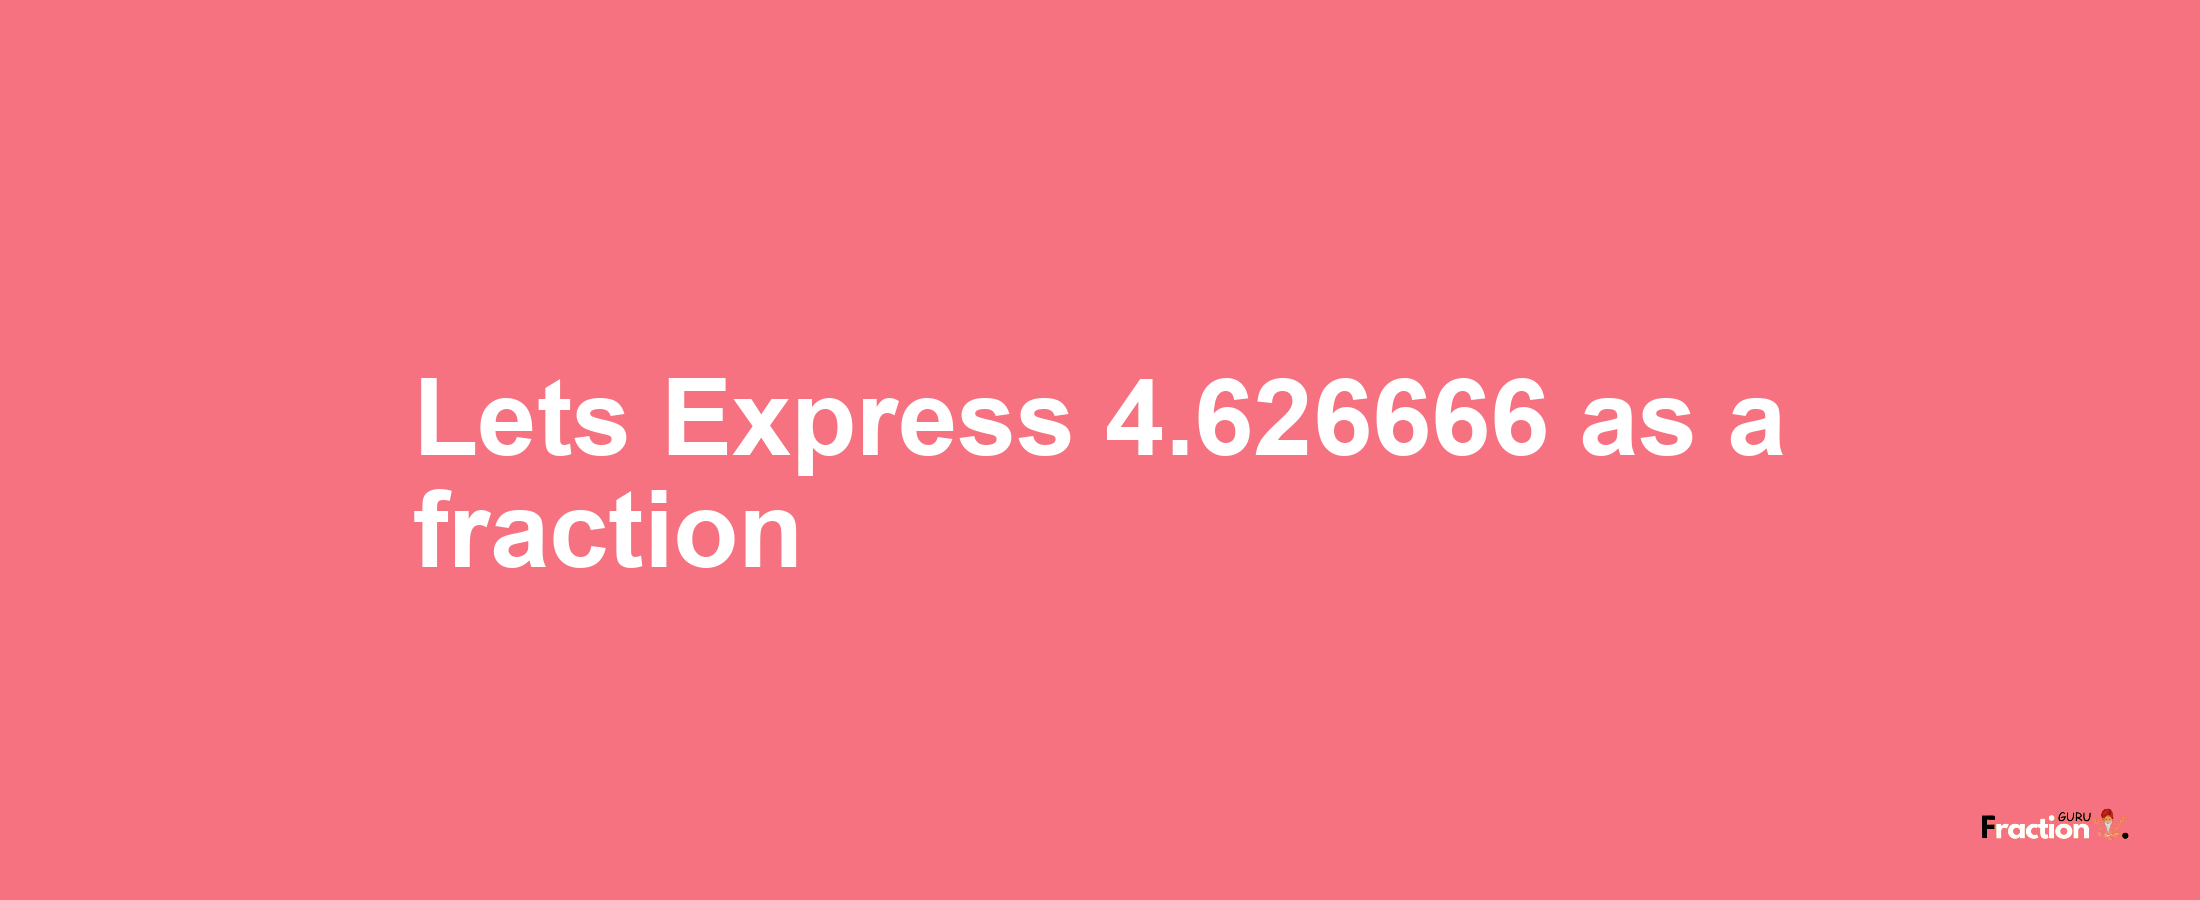 Lets Express 4.626666 as afraction